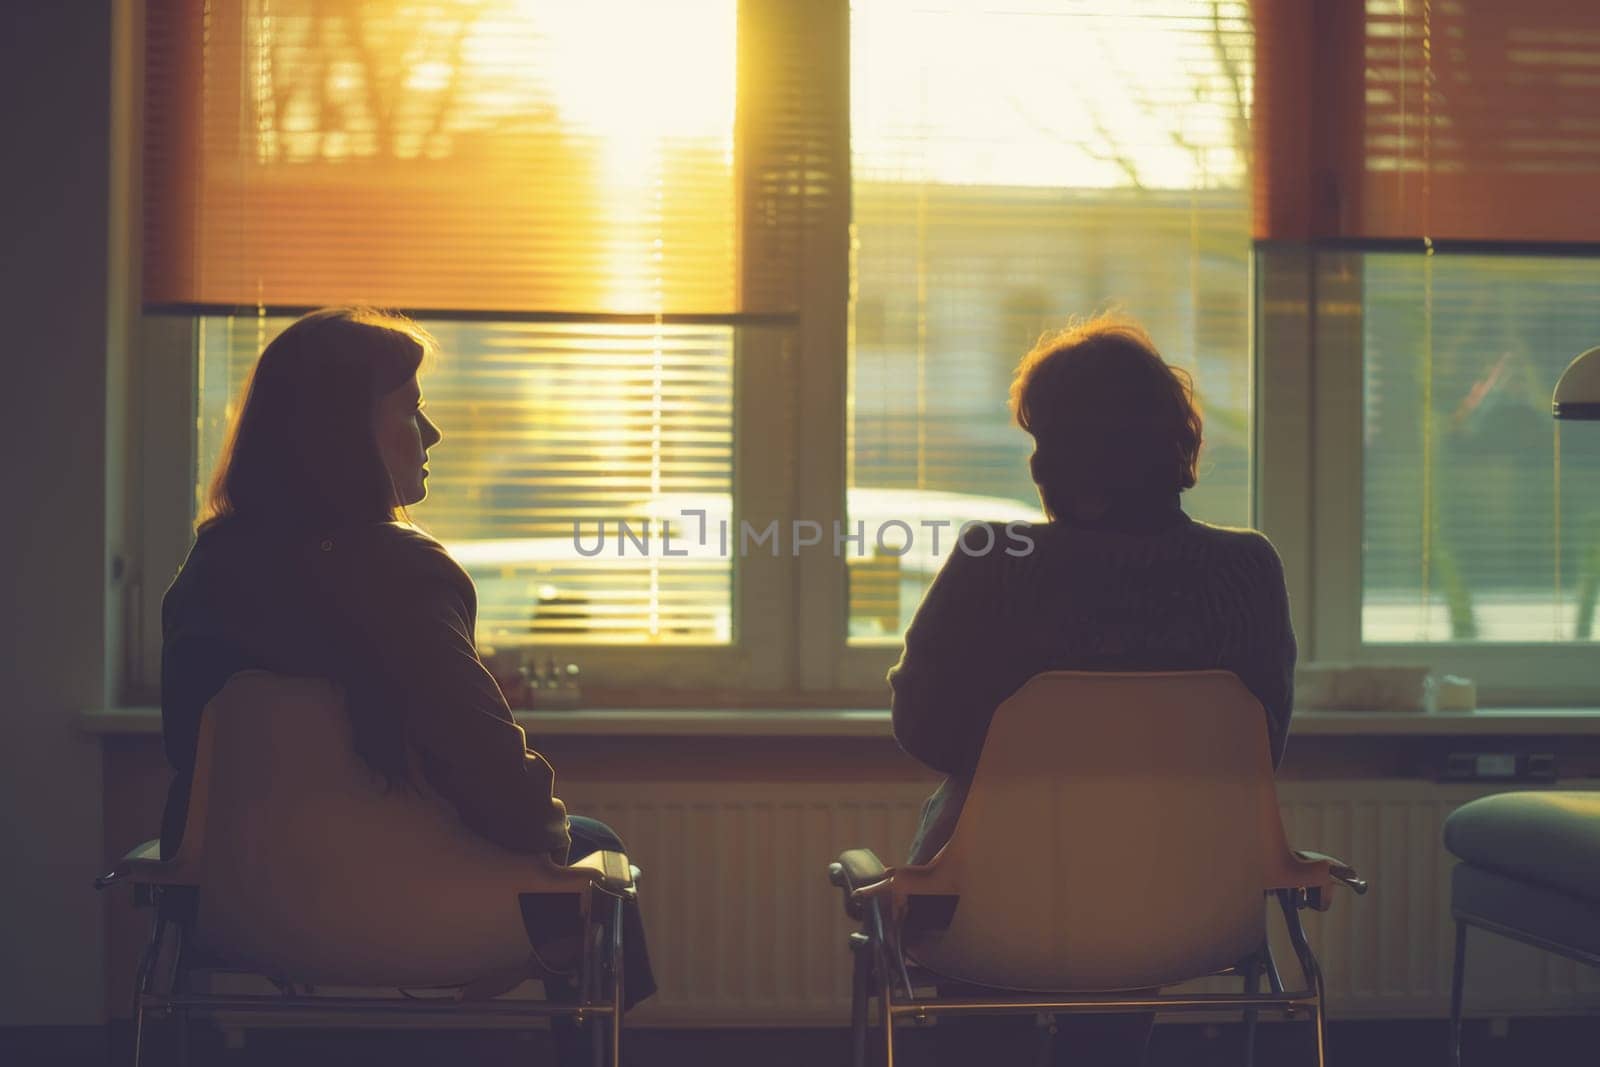 Two women sit in silhouette against a warm, sunlit window, capturing a moment of quiet anticipation or reflection